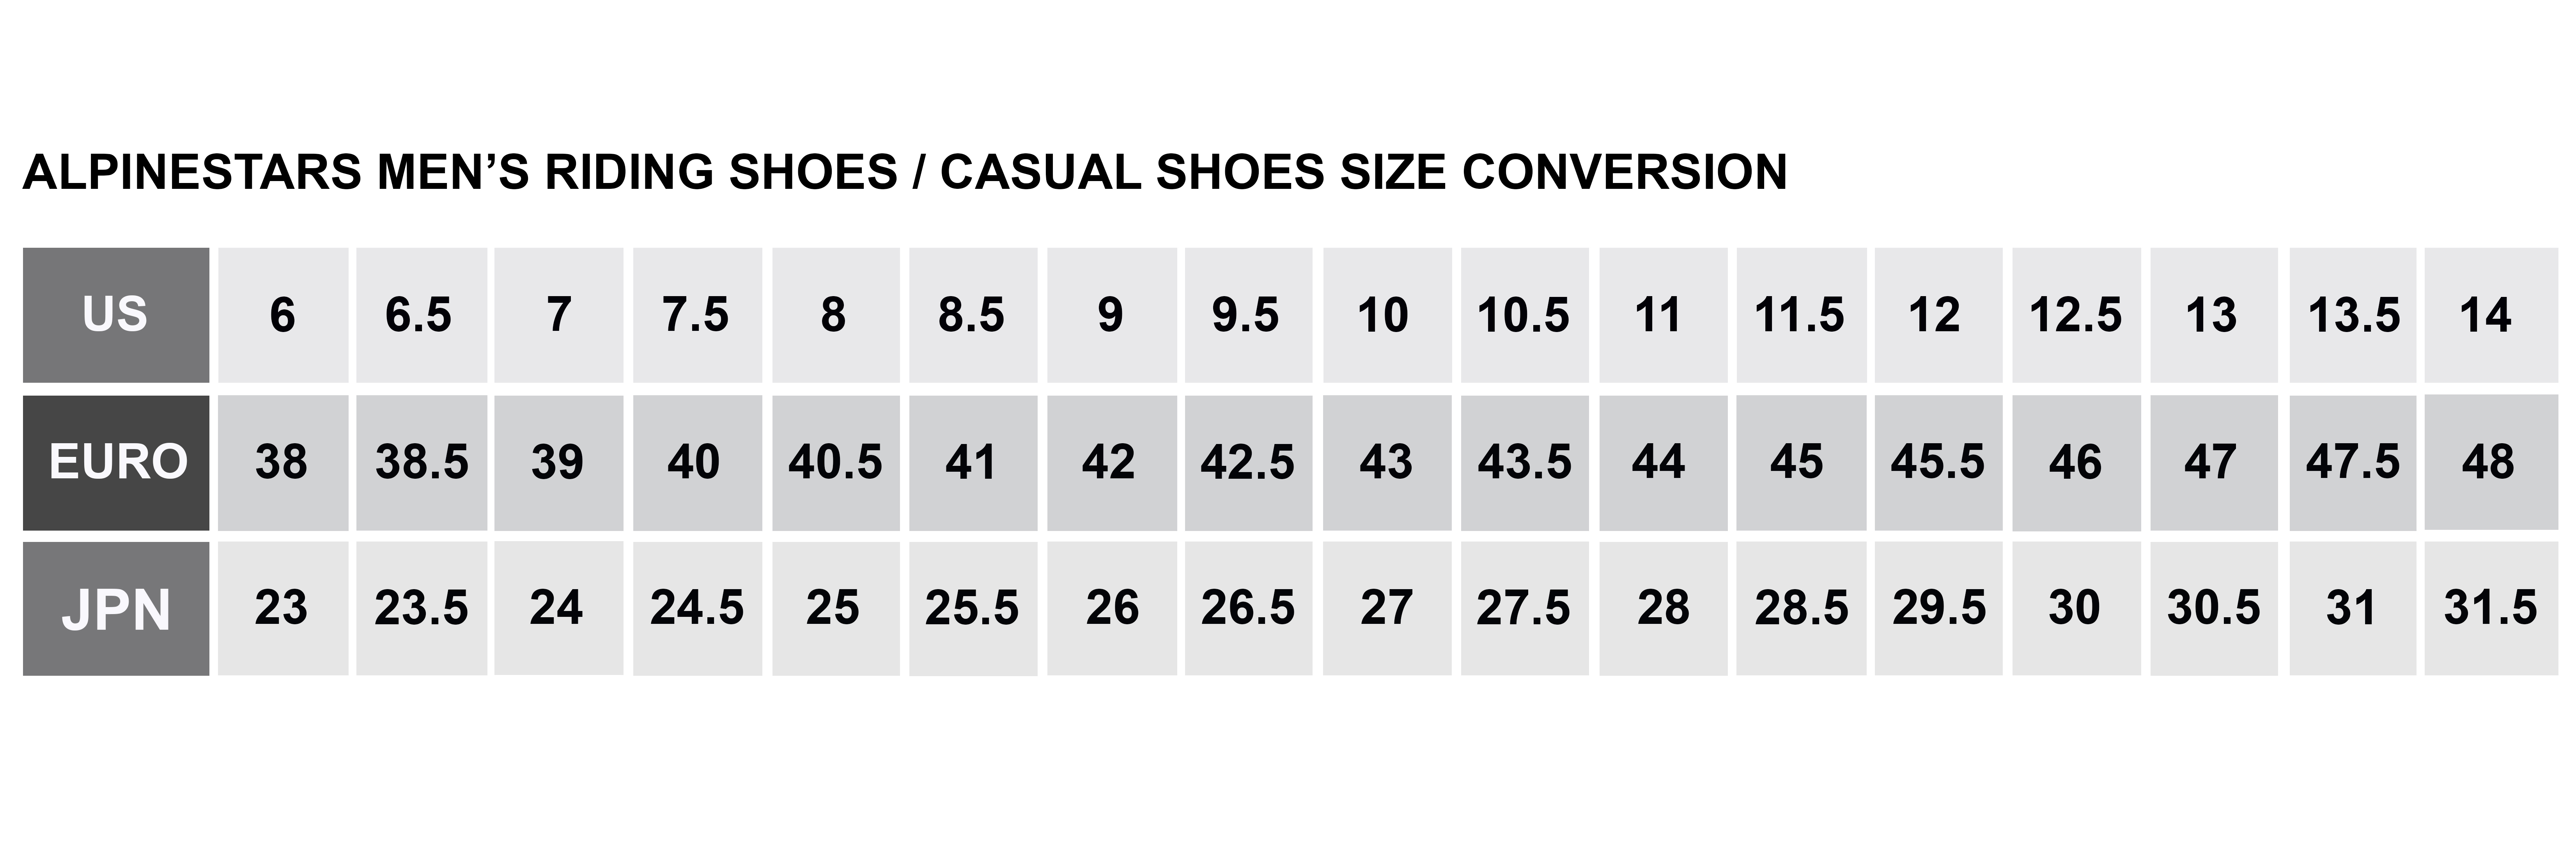 Alpine riding shoes casual shoes chart JPEG